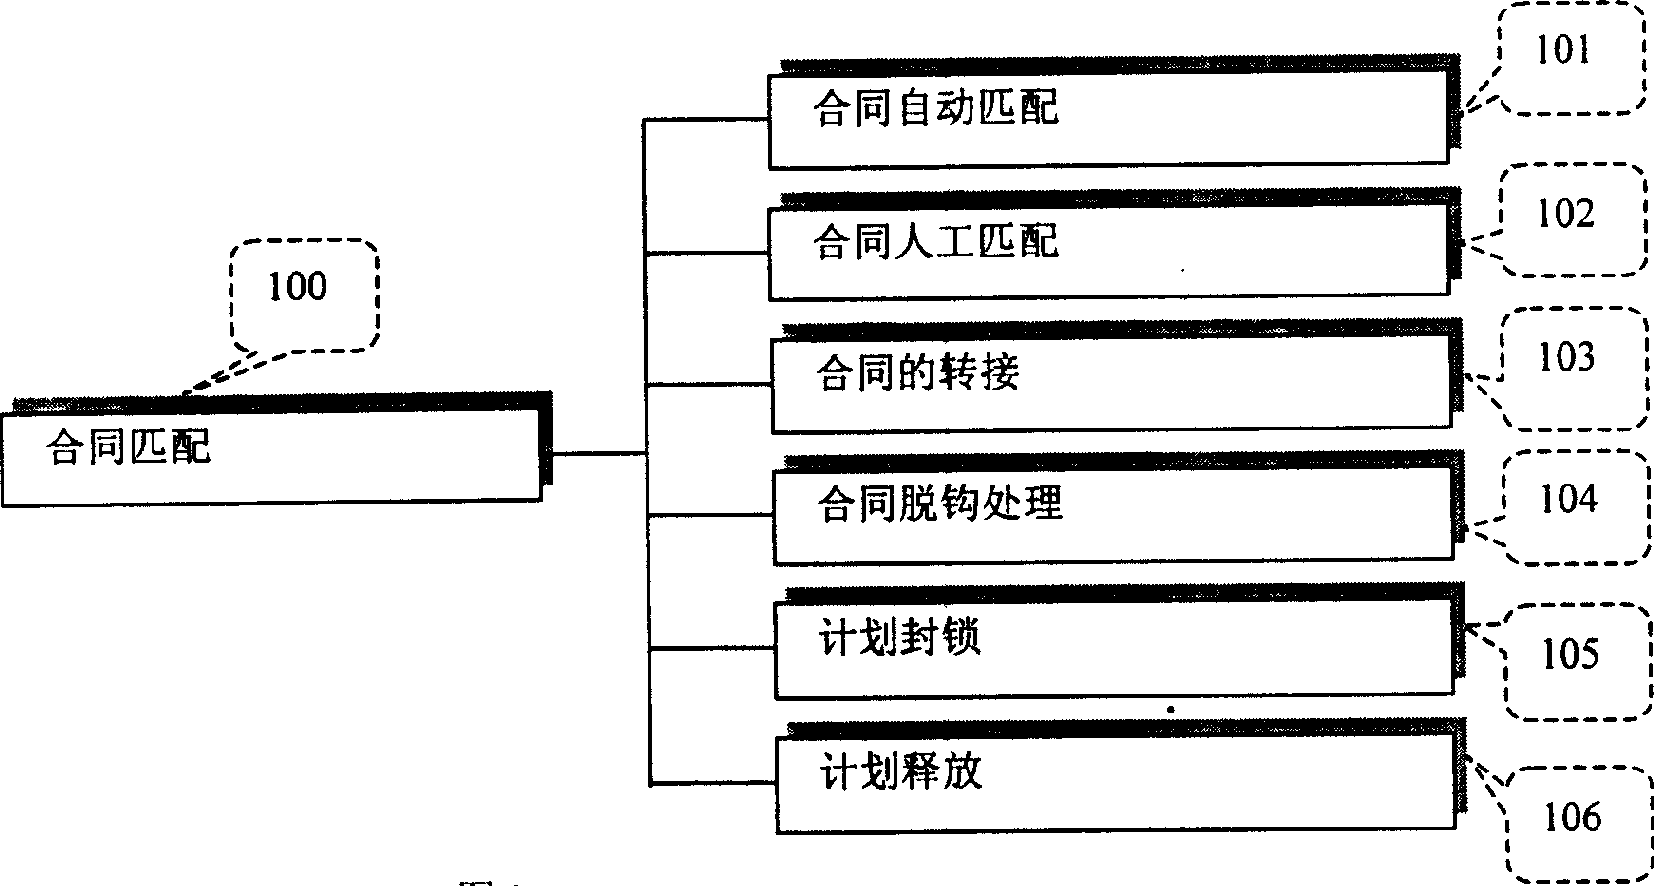 Method of united optimized managing contracts and repertories in plane of steel production